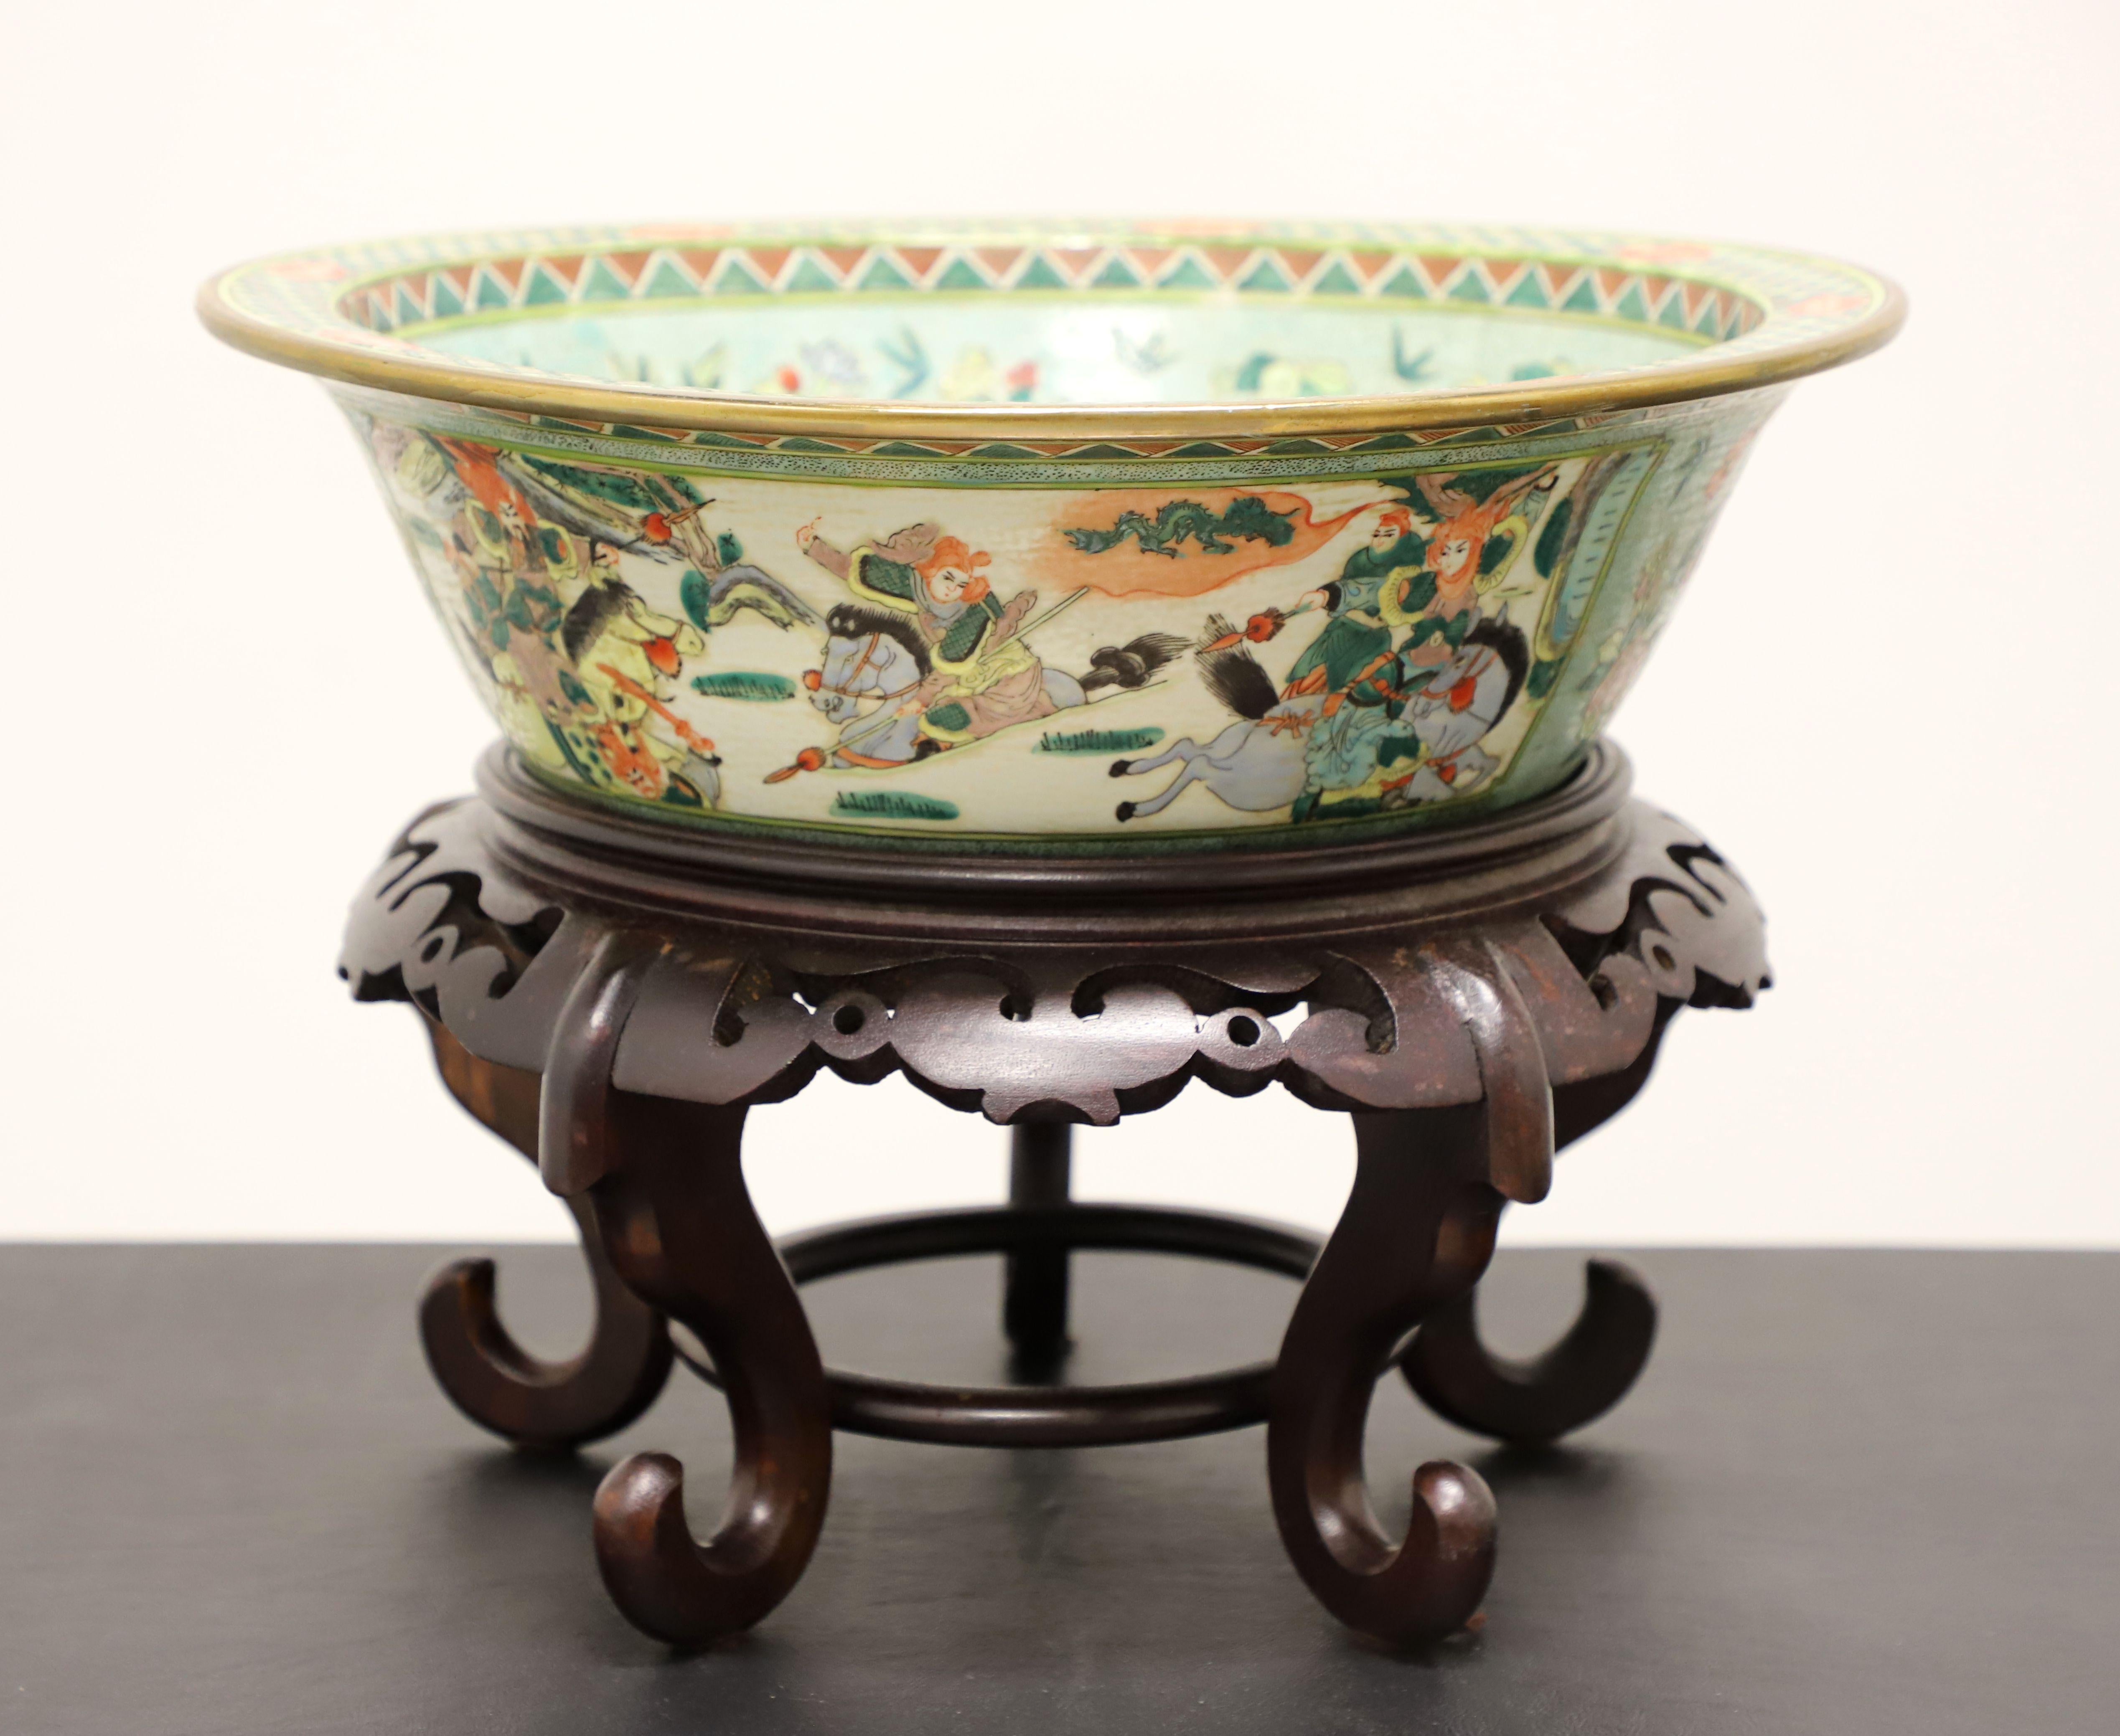 A Mid 20th Century Asian style decorative porcelain bowl with stand, unbranded. A beautiful multi-color porcelain round bowl with hand painted Chinoiserie scenes, a rough textured finish, and a separate decoratively carved round wood stand. Painted